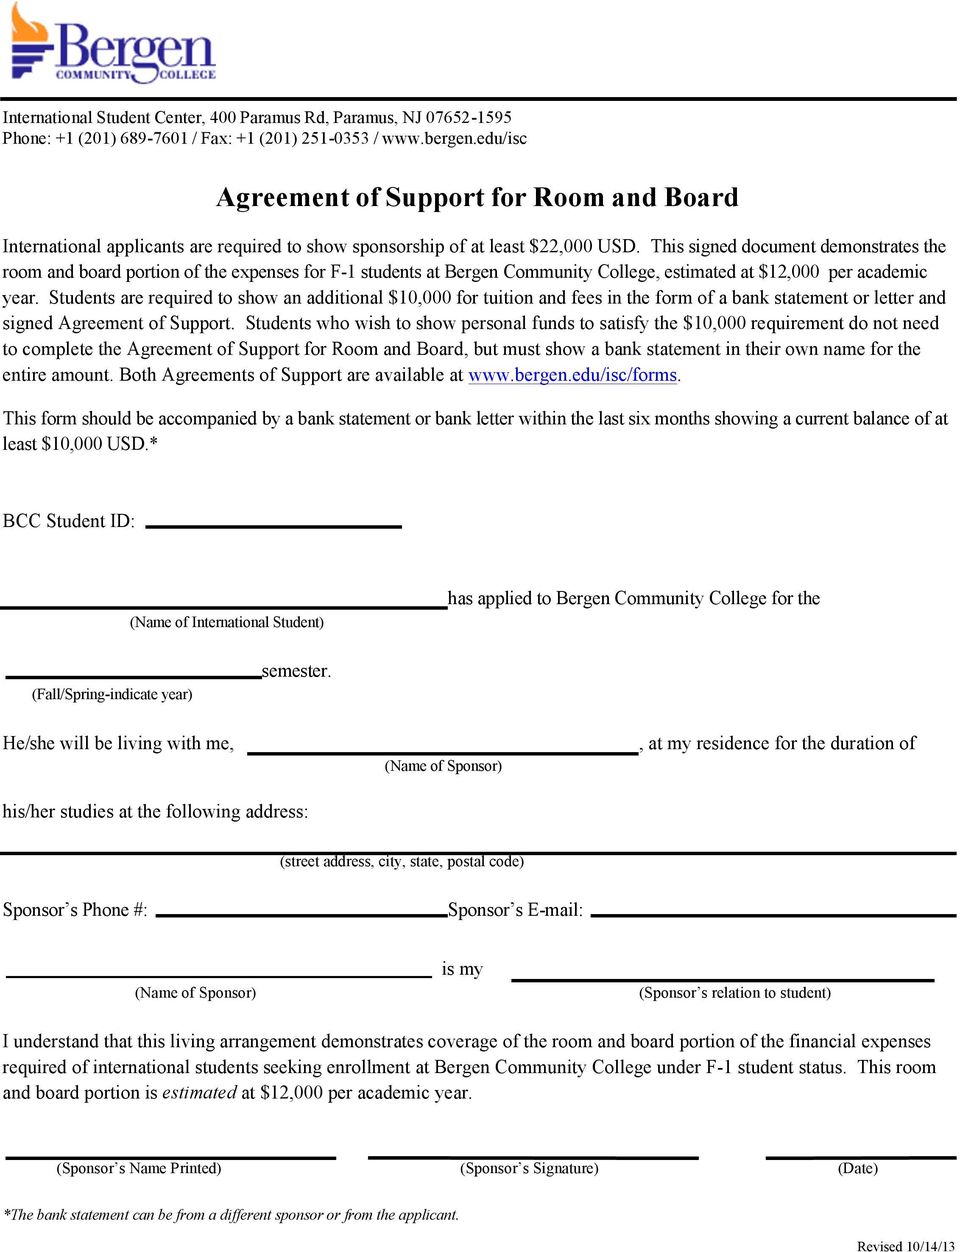 Students are required to show an additional $10,000 for tuition and fees in the form of a bank statement or letter and signed Agreement of Support.